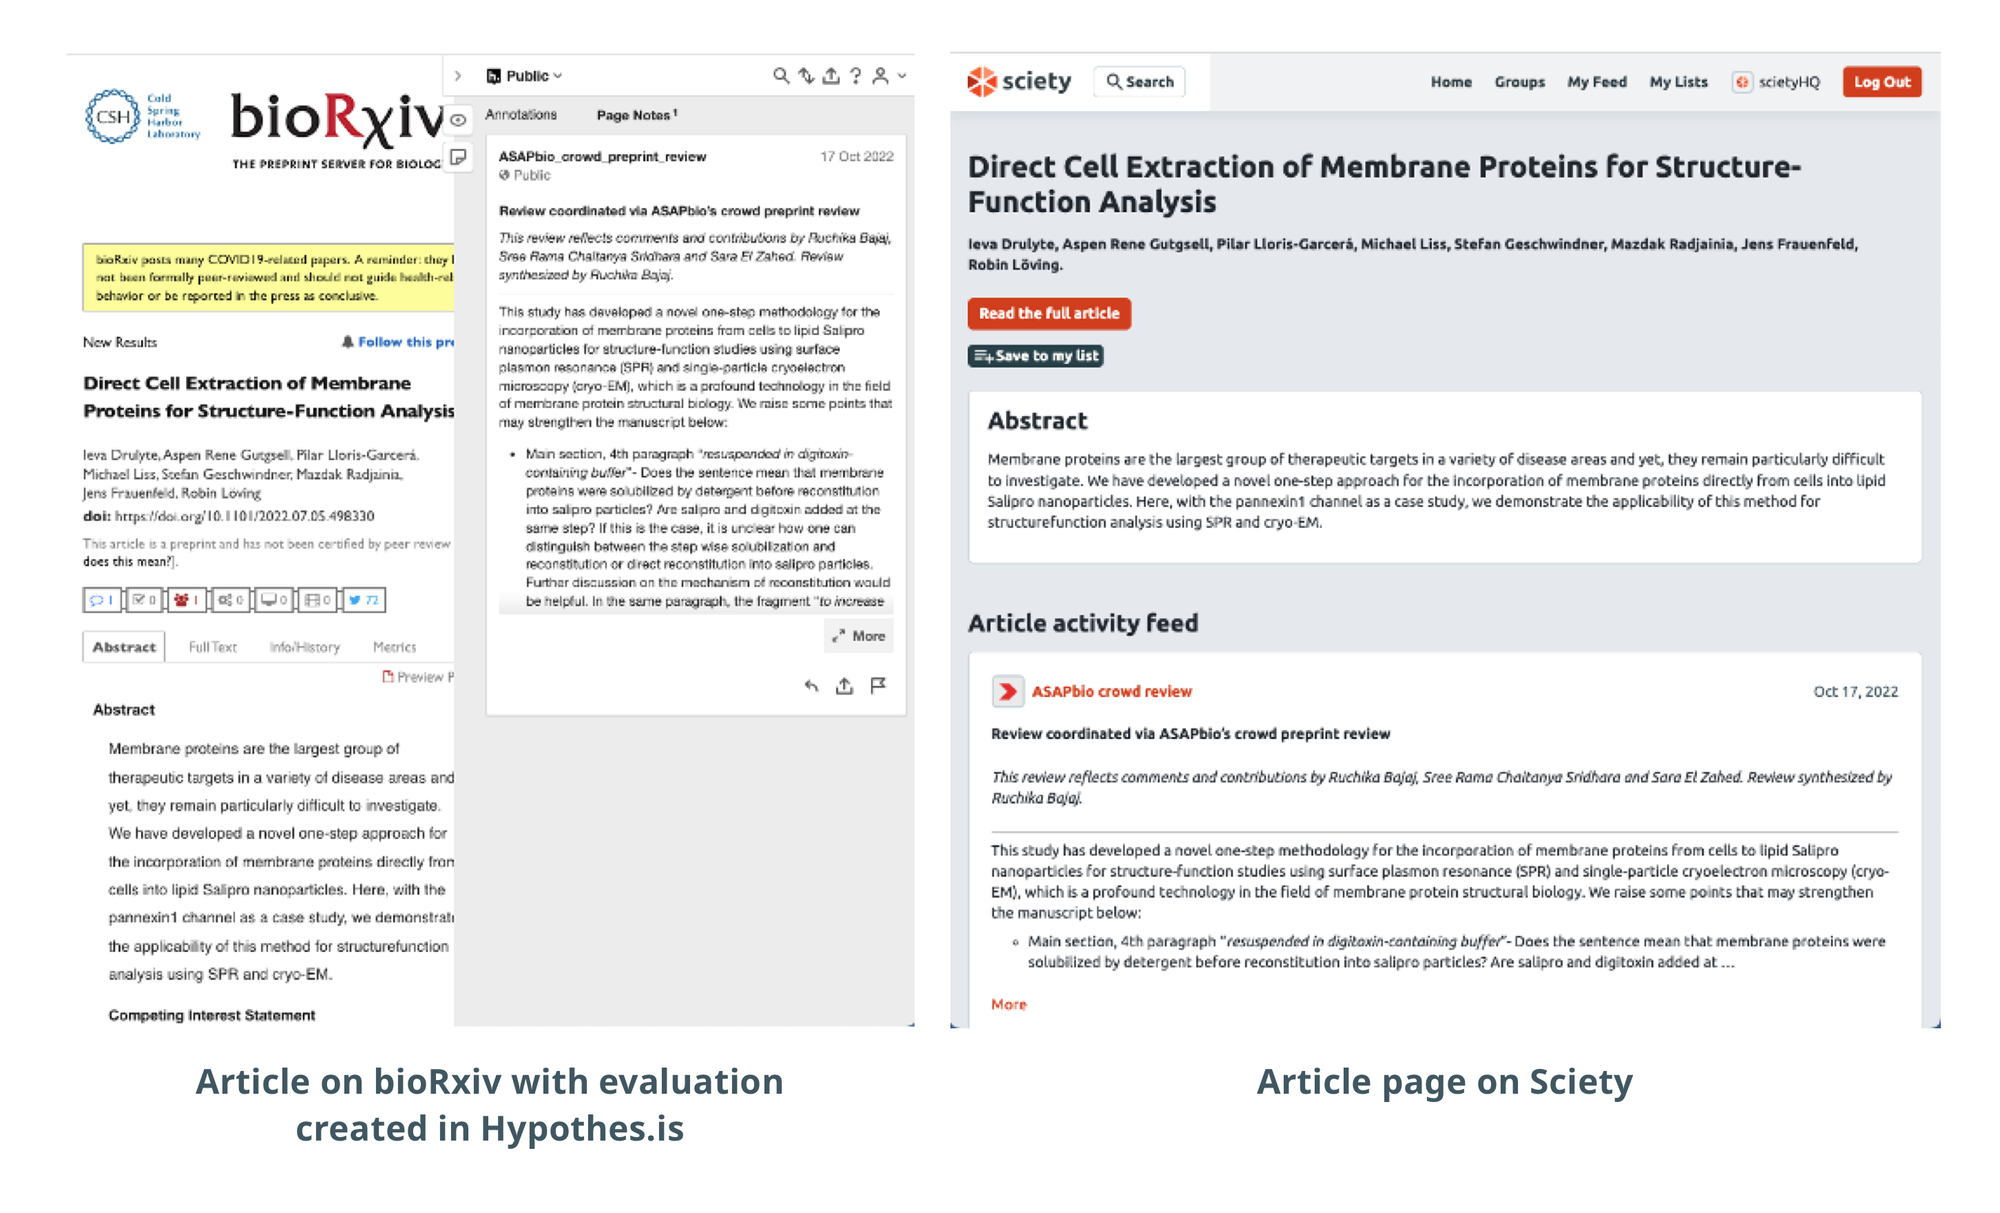 Are you evaluating preprints? Here's how to showcase your work on Sciety